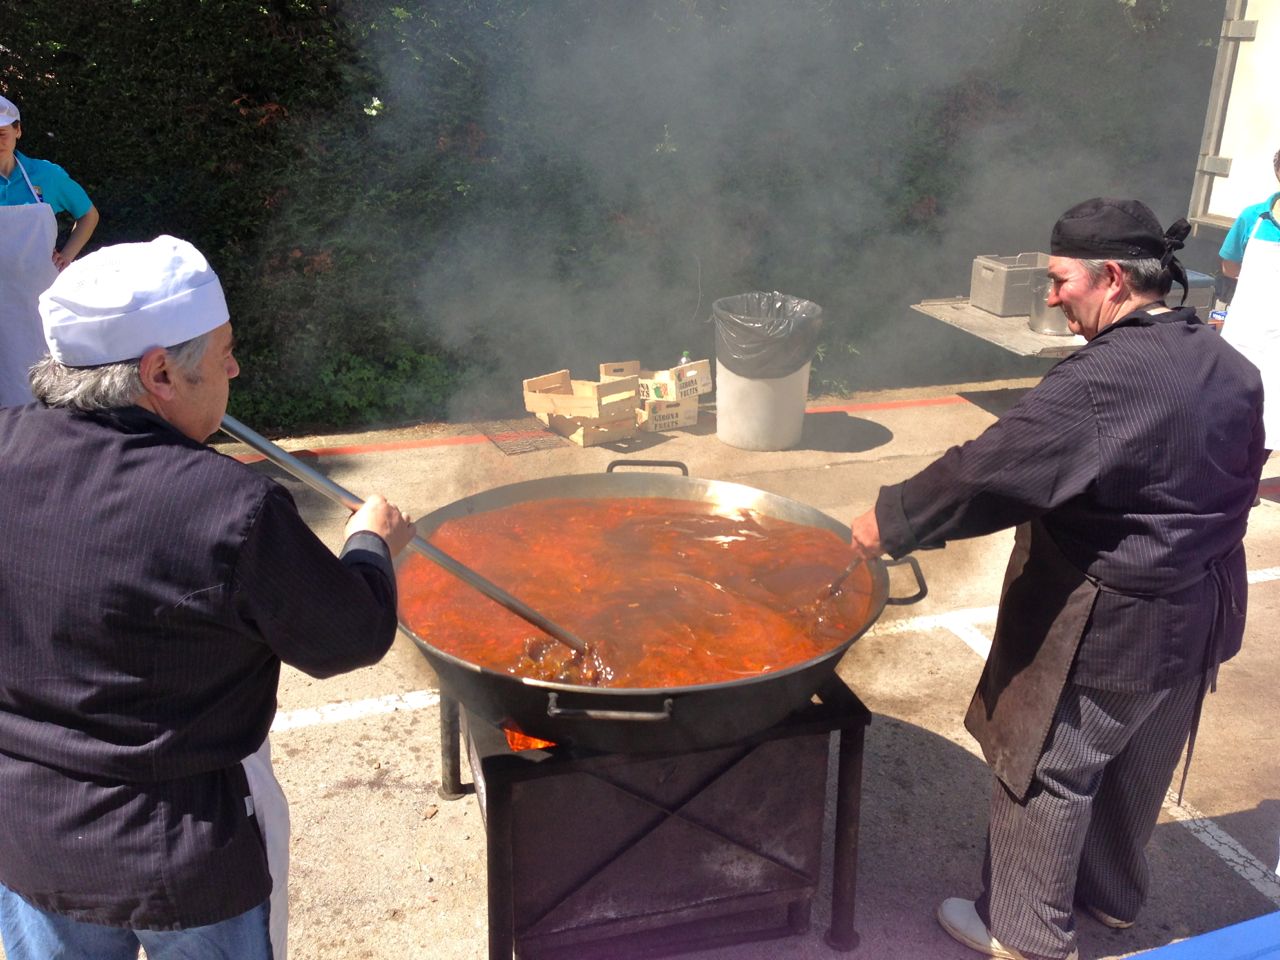 Side view of 2 people, standing and facing towards each other, stirring a large pan of food that's between them